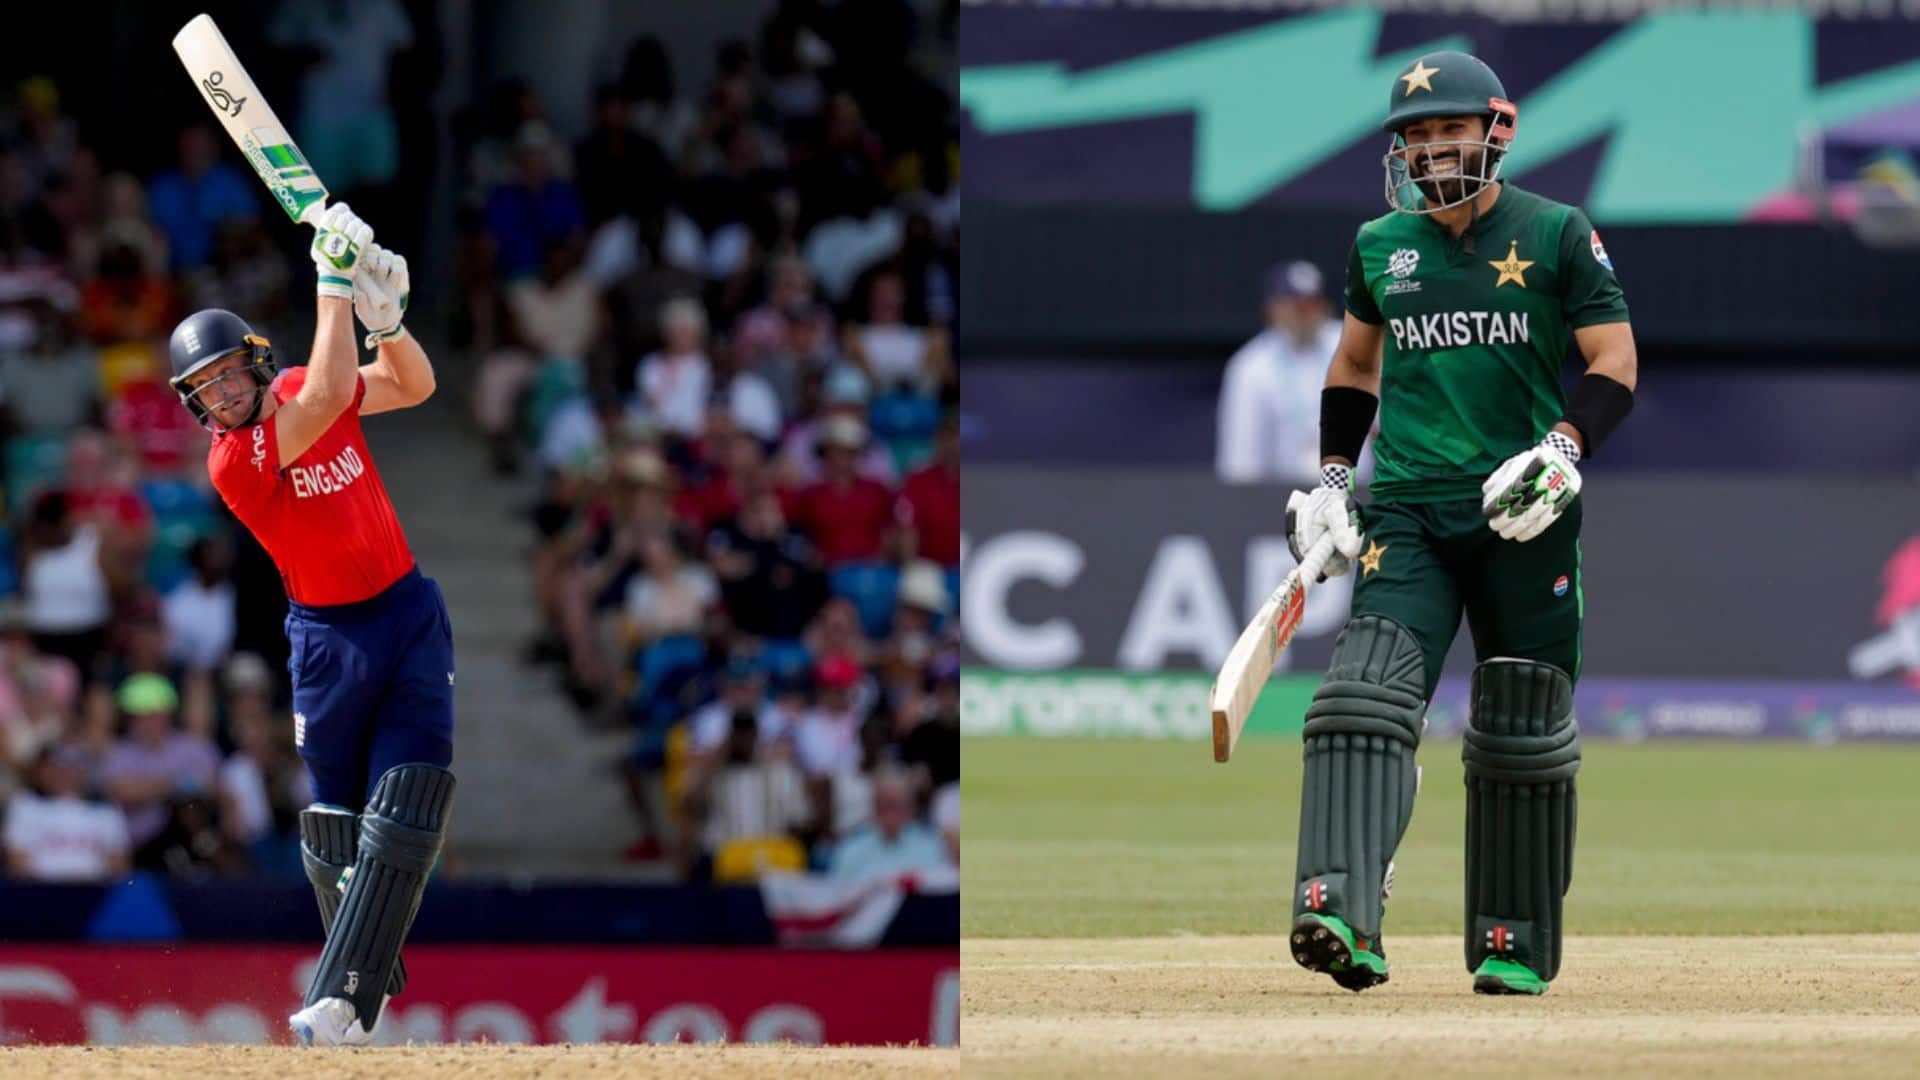 Rizwan Dethroned As Buttler Surpasses Him To Top 'This' List Featuring MS Dhoni